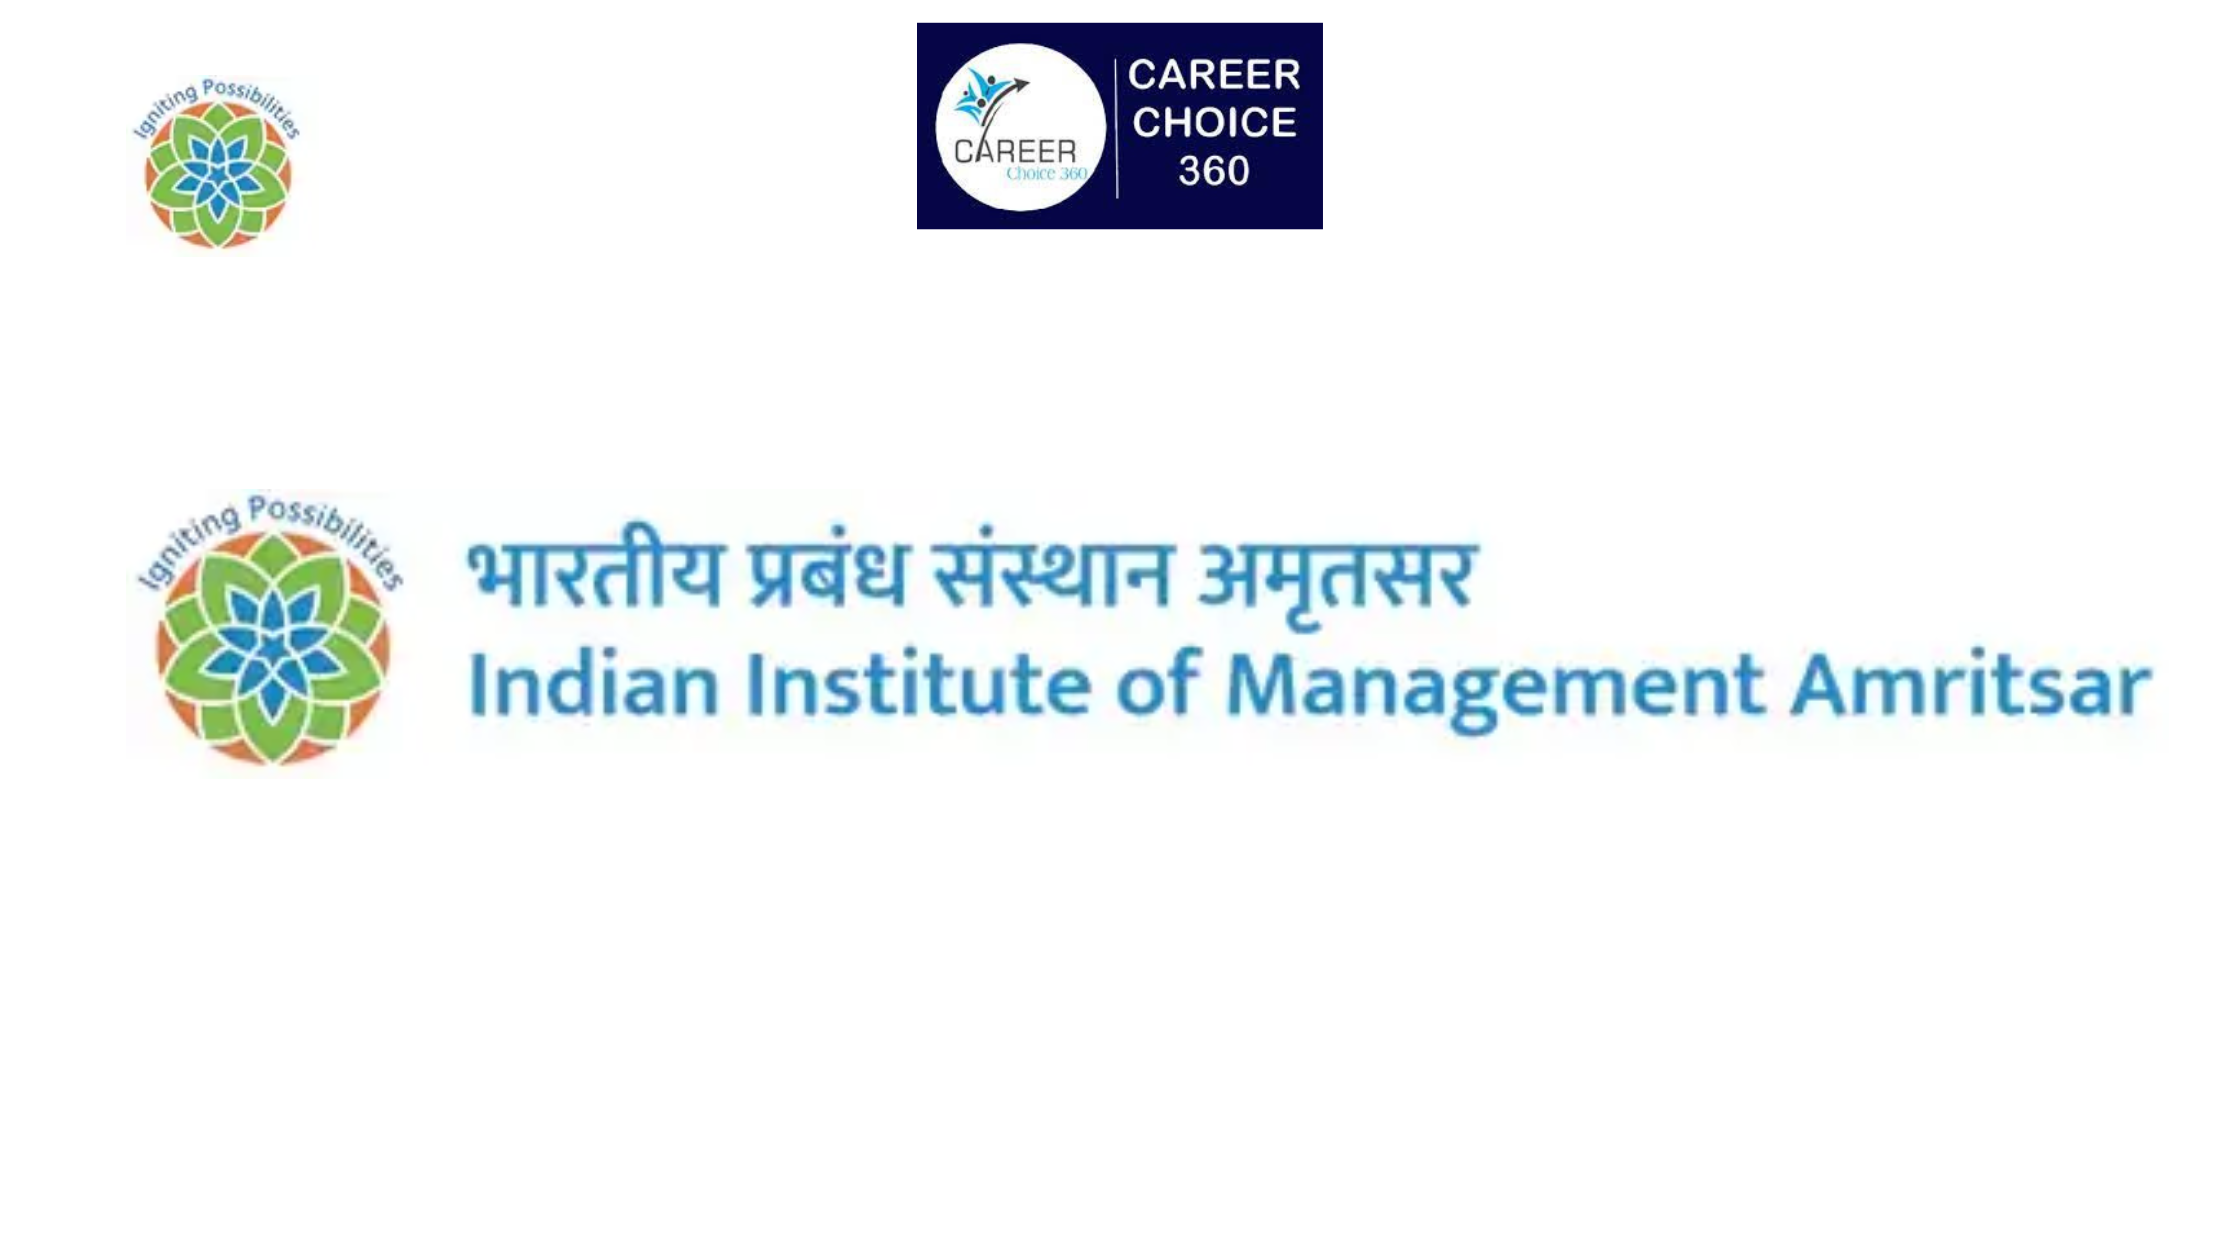 You are currently viewing Indian Institute of Management of Amritsar (IIM Amritsar) : Course & Fees, Admission procedure, Rankings, and Placements